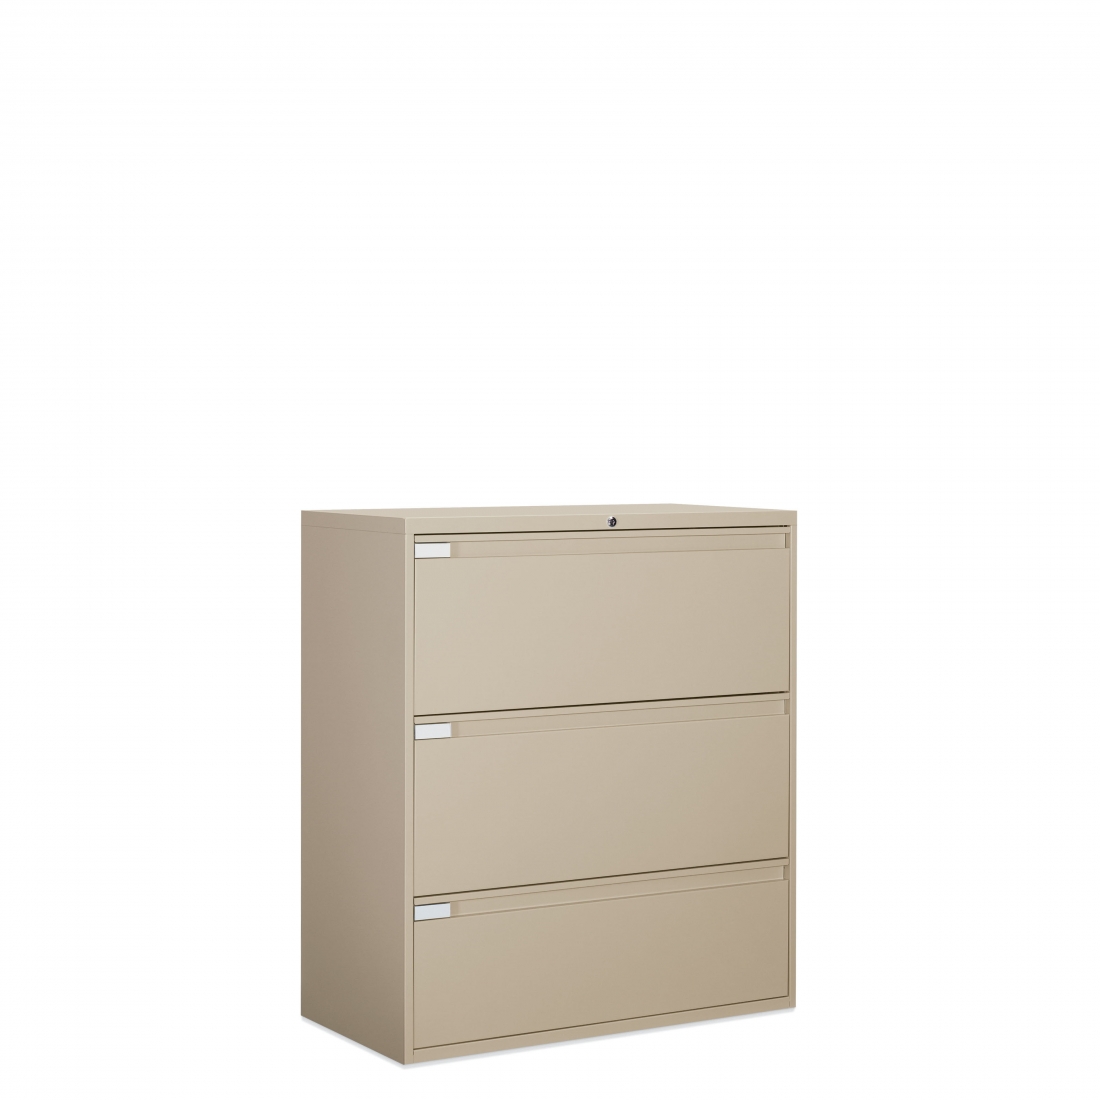 Professional lateral file capability with fixed or receding drawers and looped full pulls